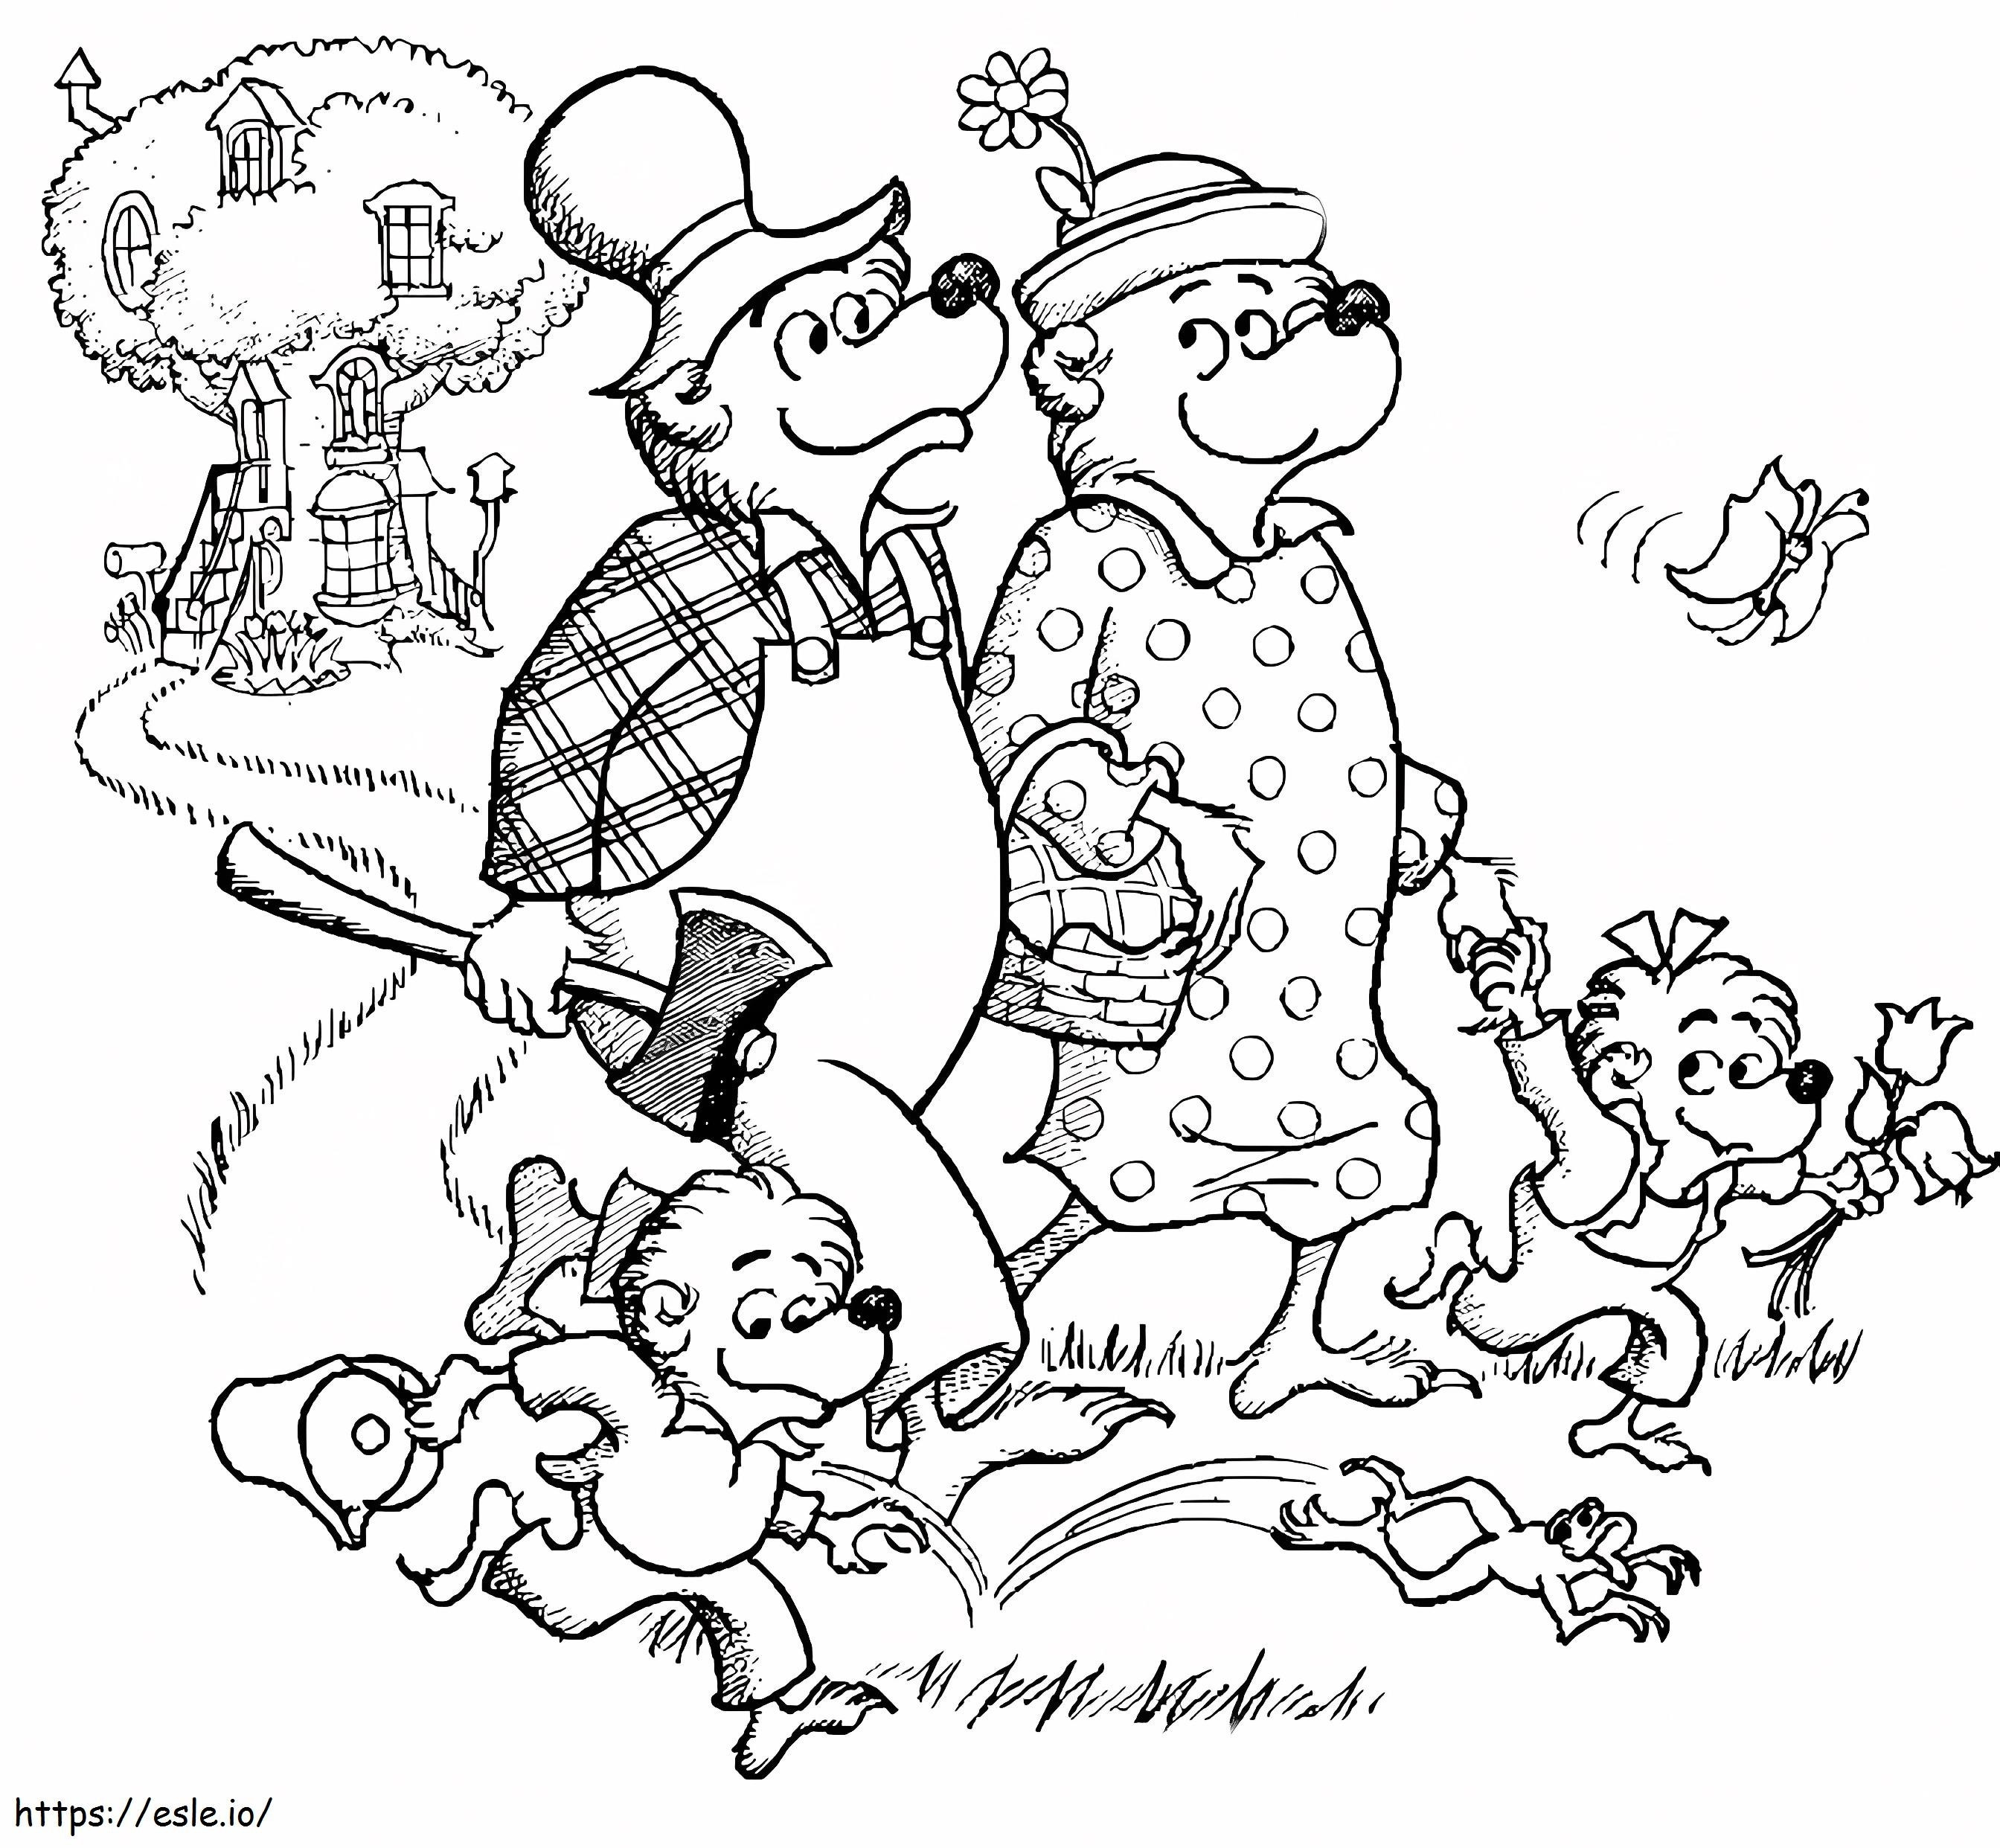 Berenstain Bears 1 coloring page